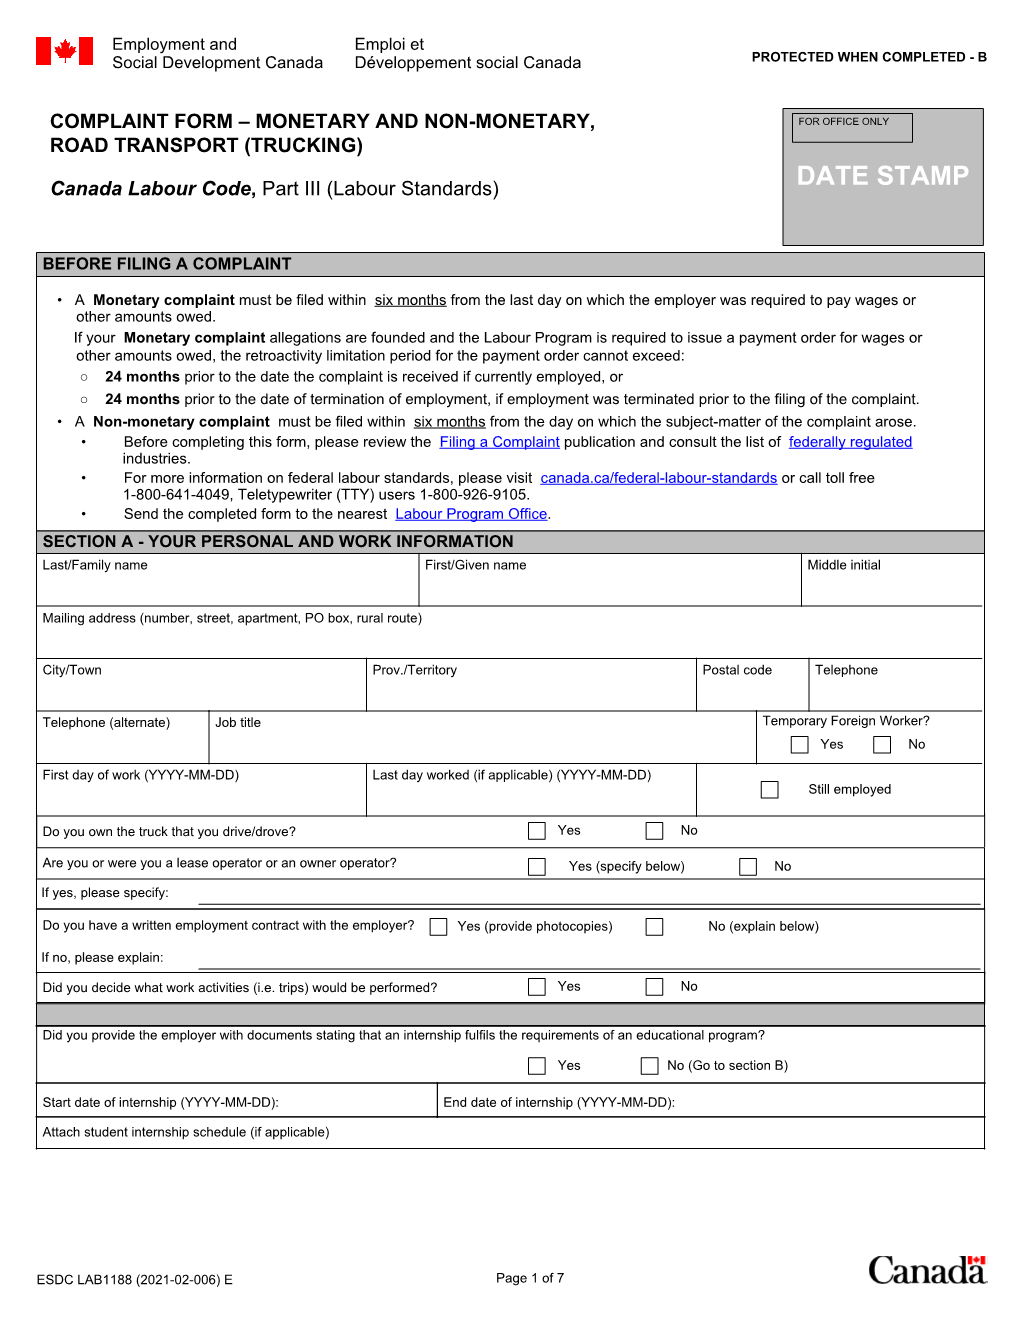 ESDC LAB1188 (2021-02-006) E Page 1 of 7 SECTION B - EMPLOYER INFORMATION Full Legal Name of Employer, Company Or Business Industry Or Business Type